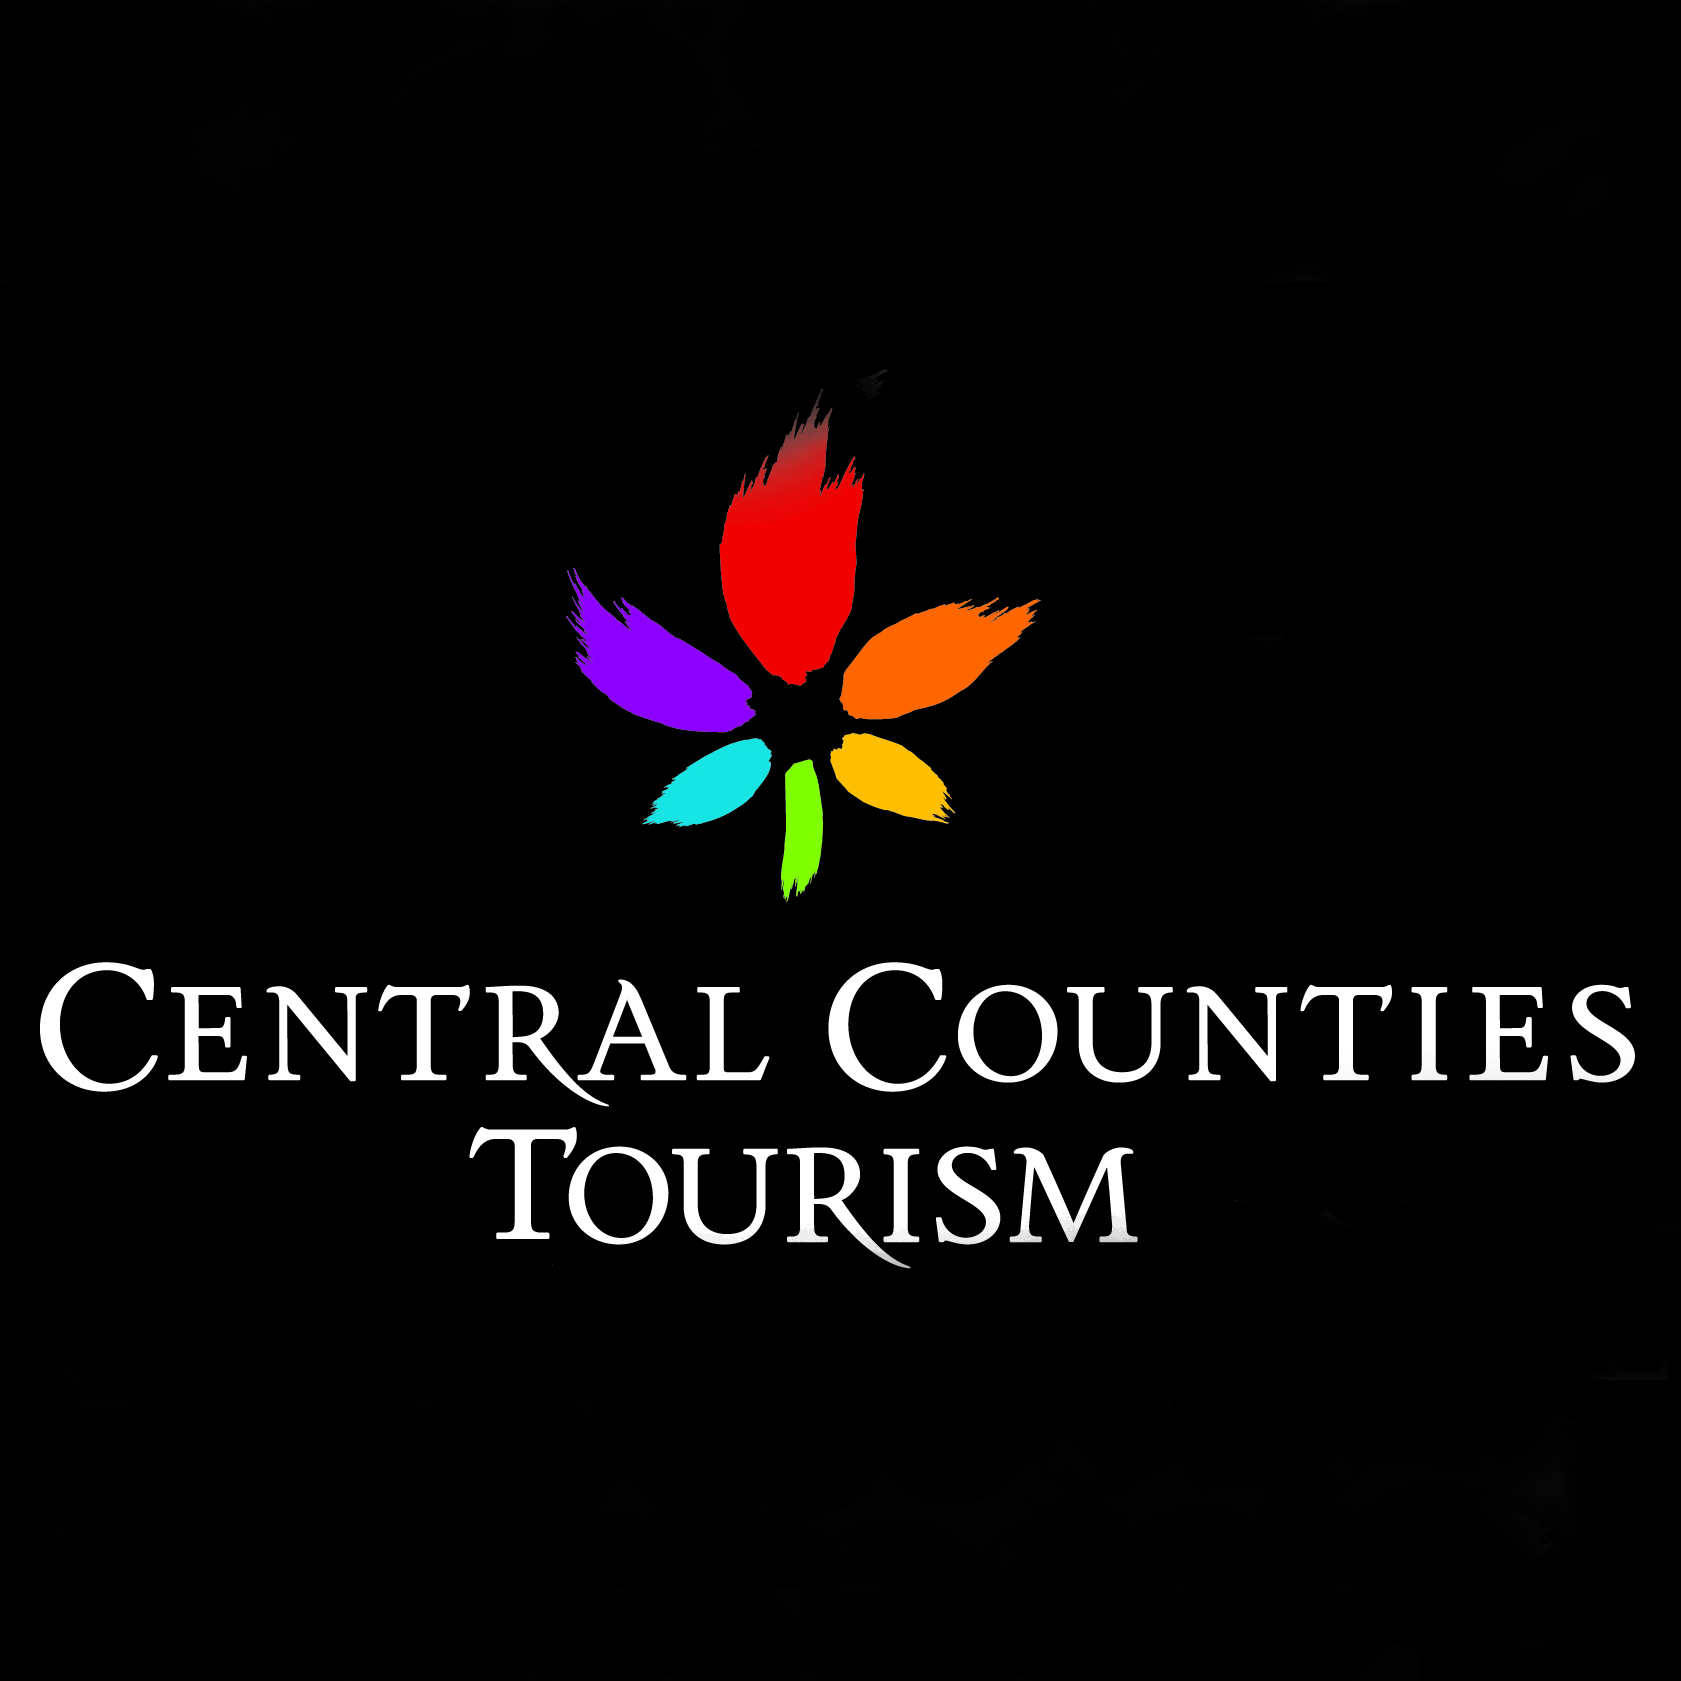 Central Counties Tourism